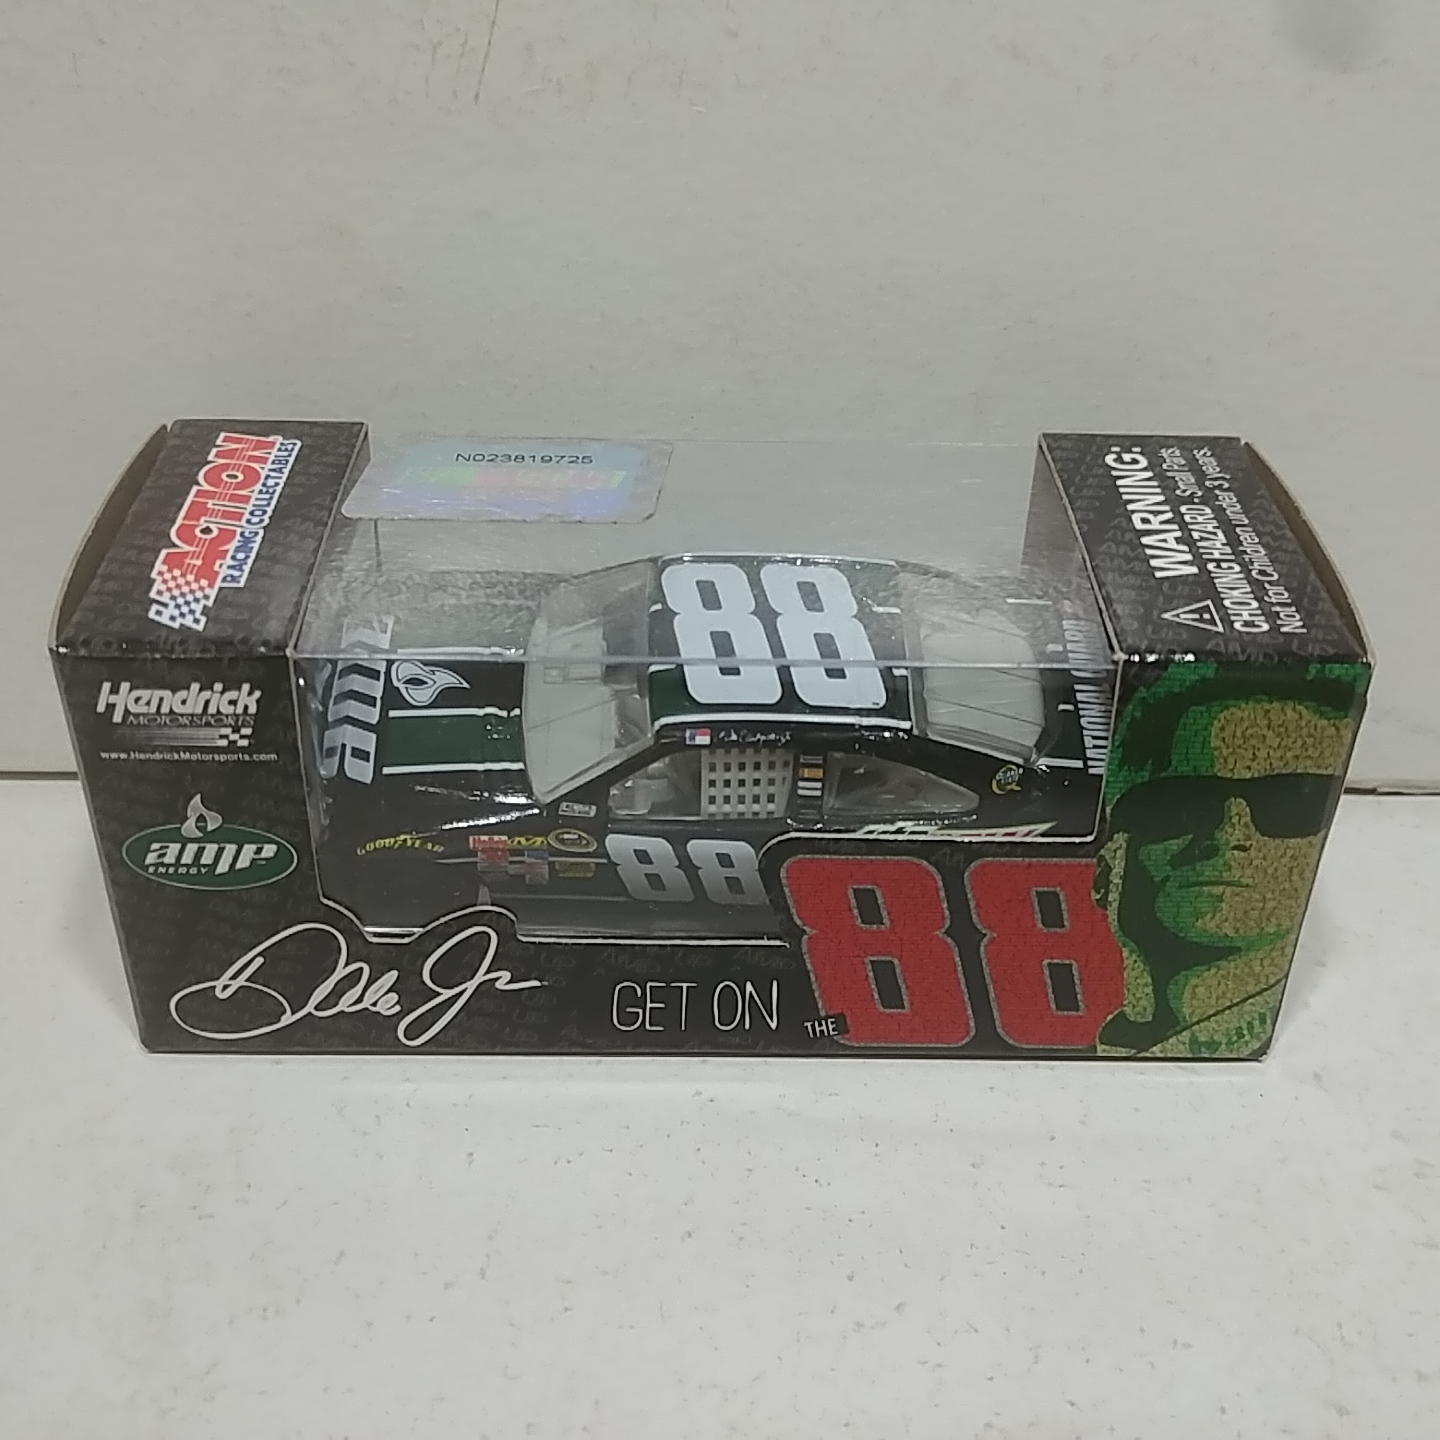 2009 Dale Earnhardt Jr 1/64th AMP "Get On The 88" Pitstop Series car